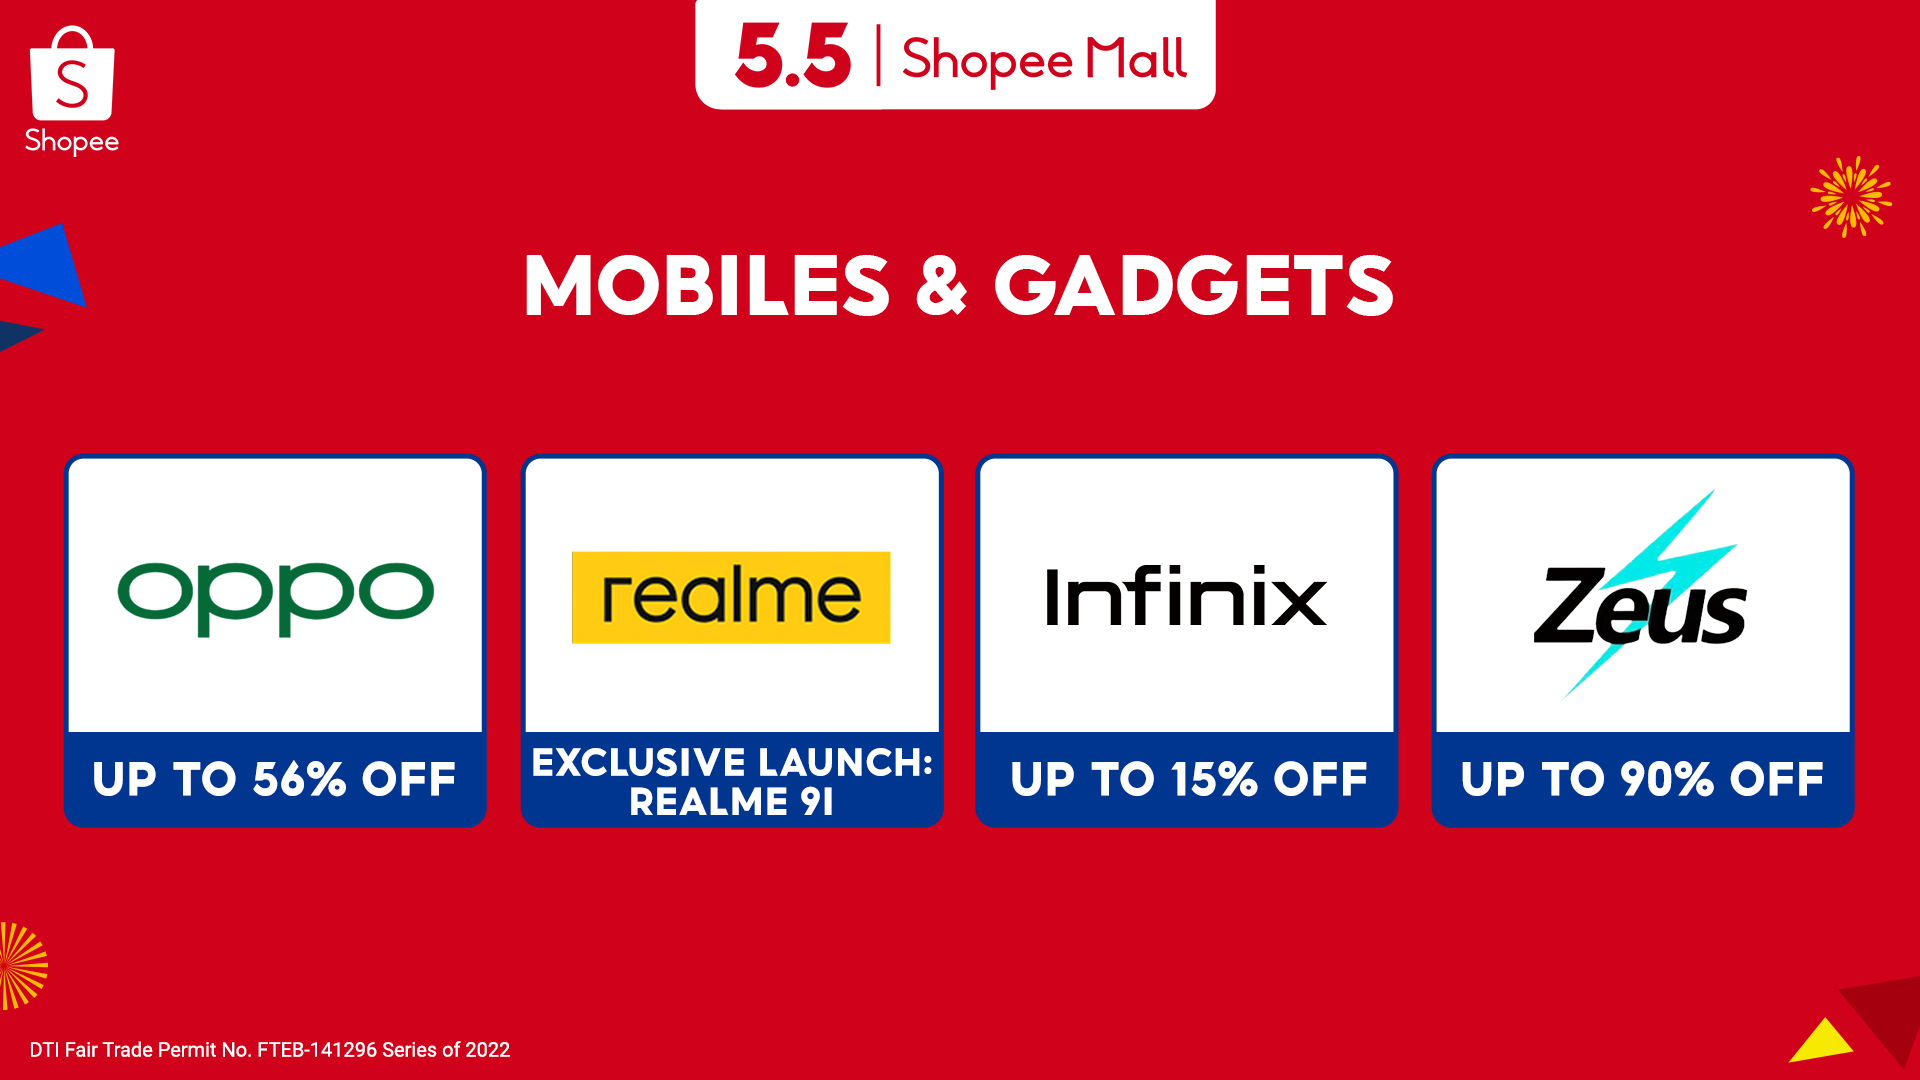 From 30% off on Dyson products to 56% off discounts at OPPO, here’s the ultimate guide to the most exciting brand deals that await at Shopee’s 5.5 Brands Festival!